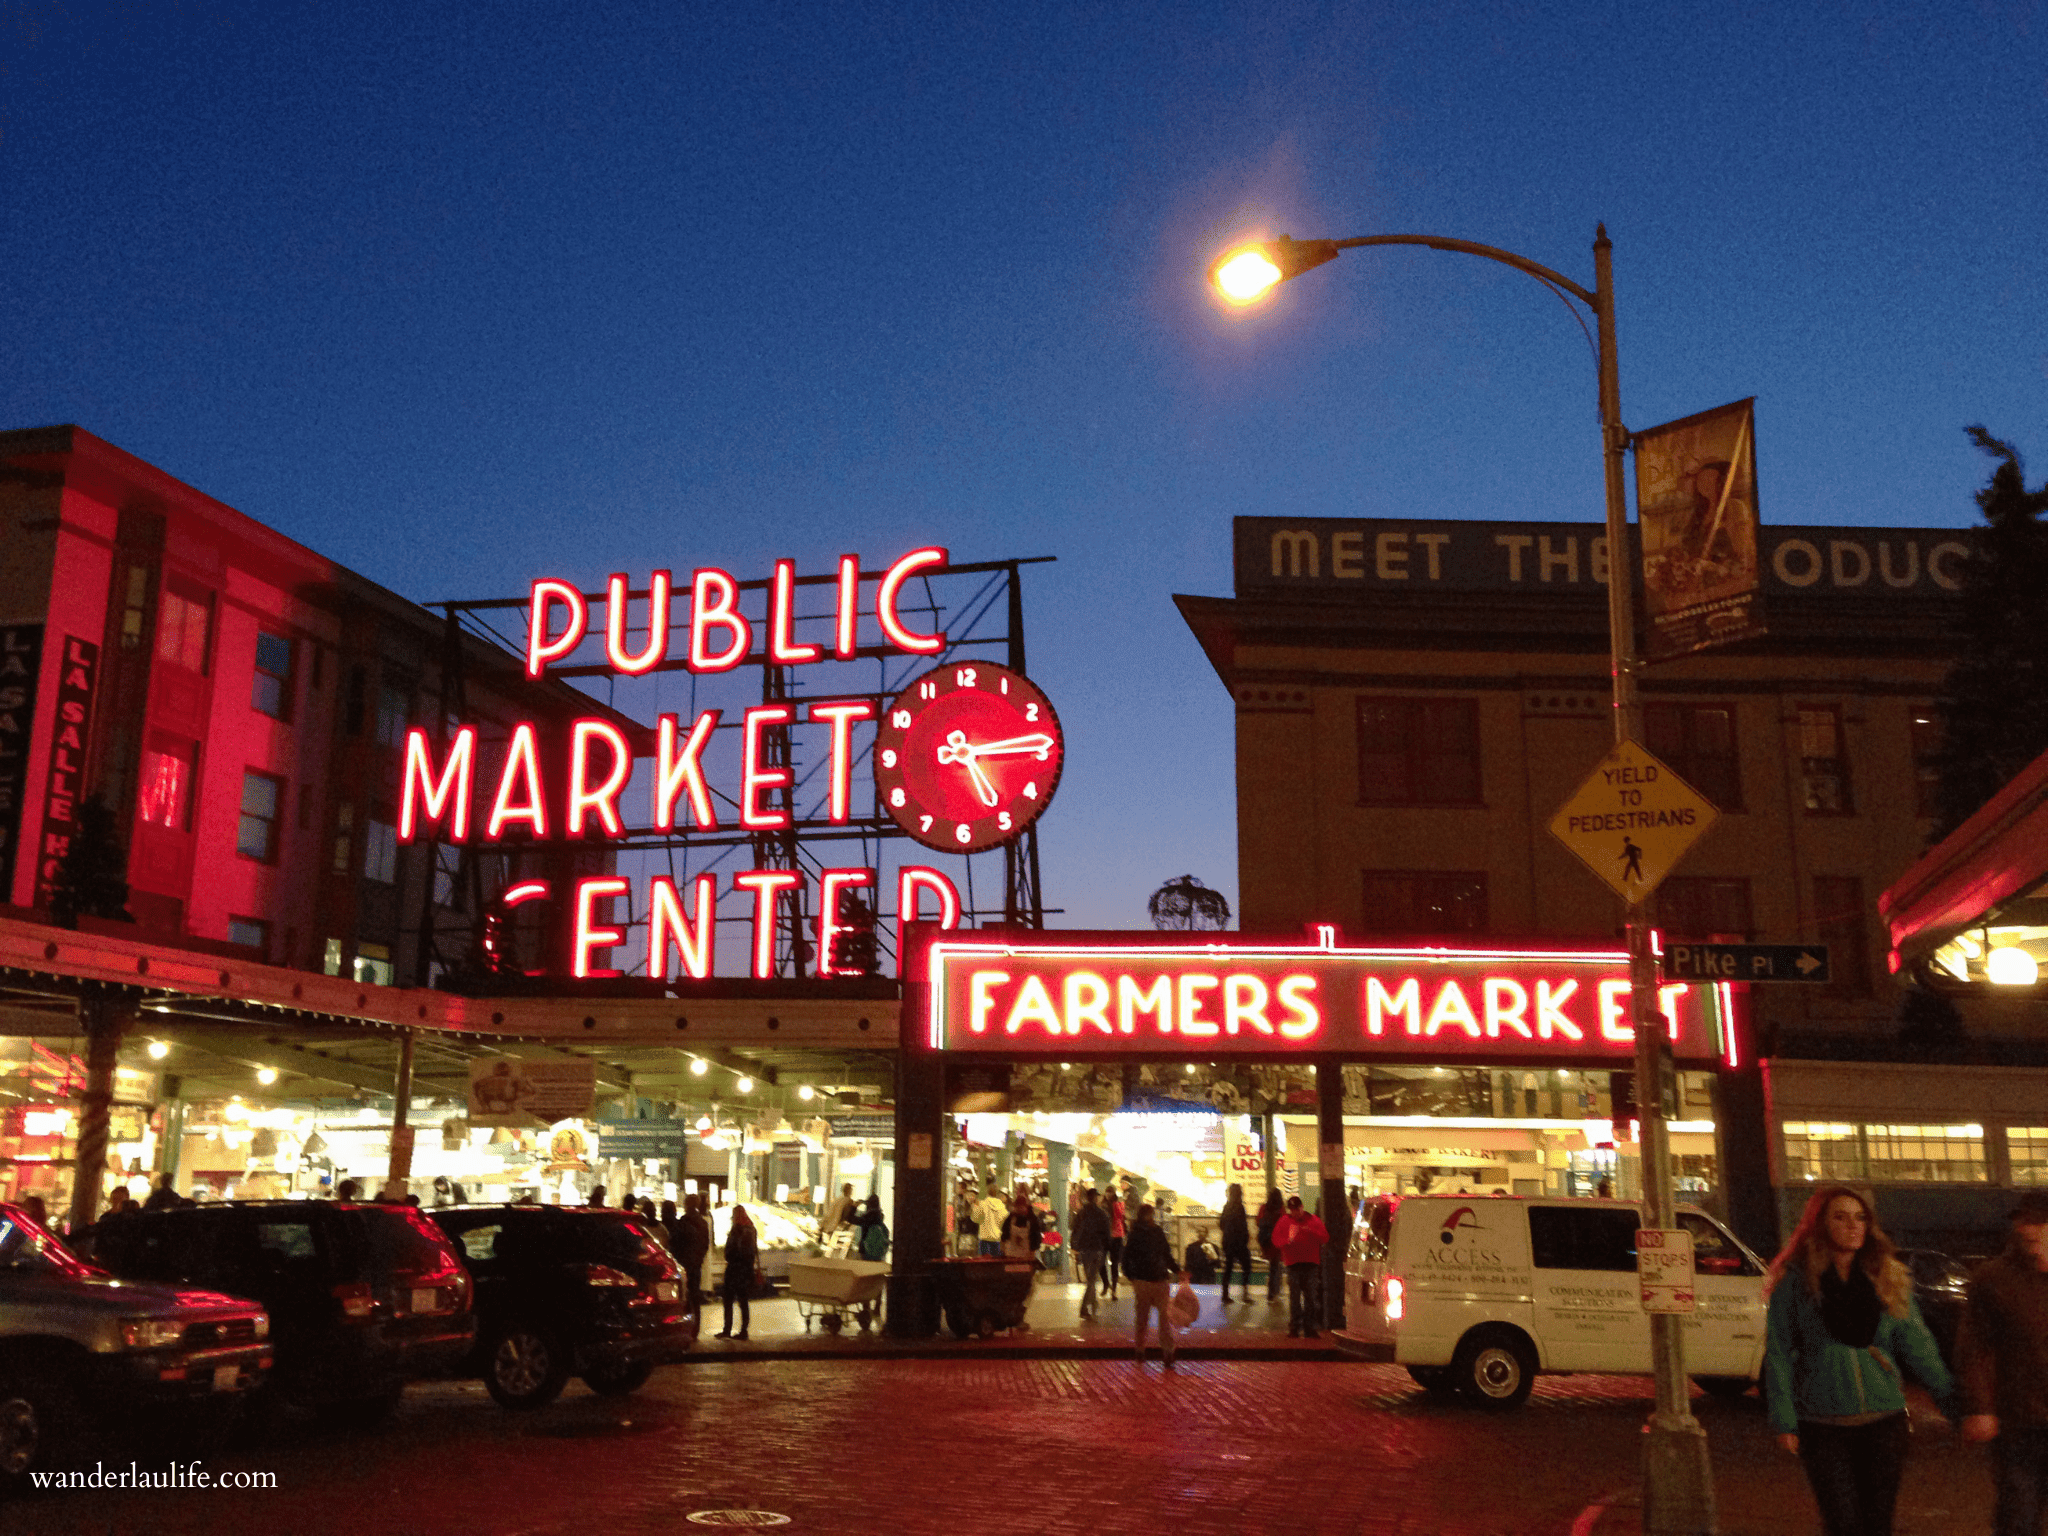 The Public Market Center main entrance and sign lit up for the evening in a walkable Seattle itinerary.